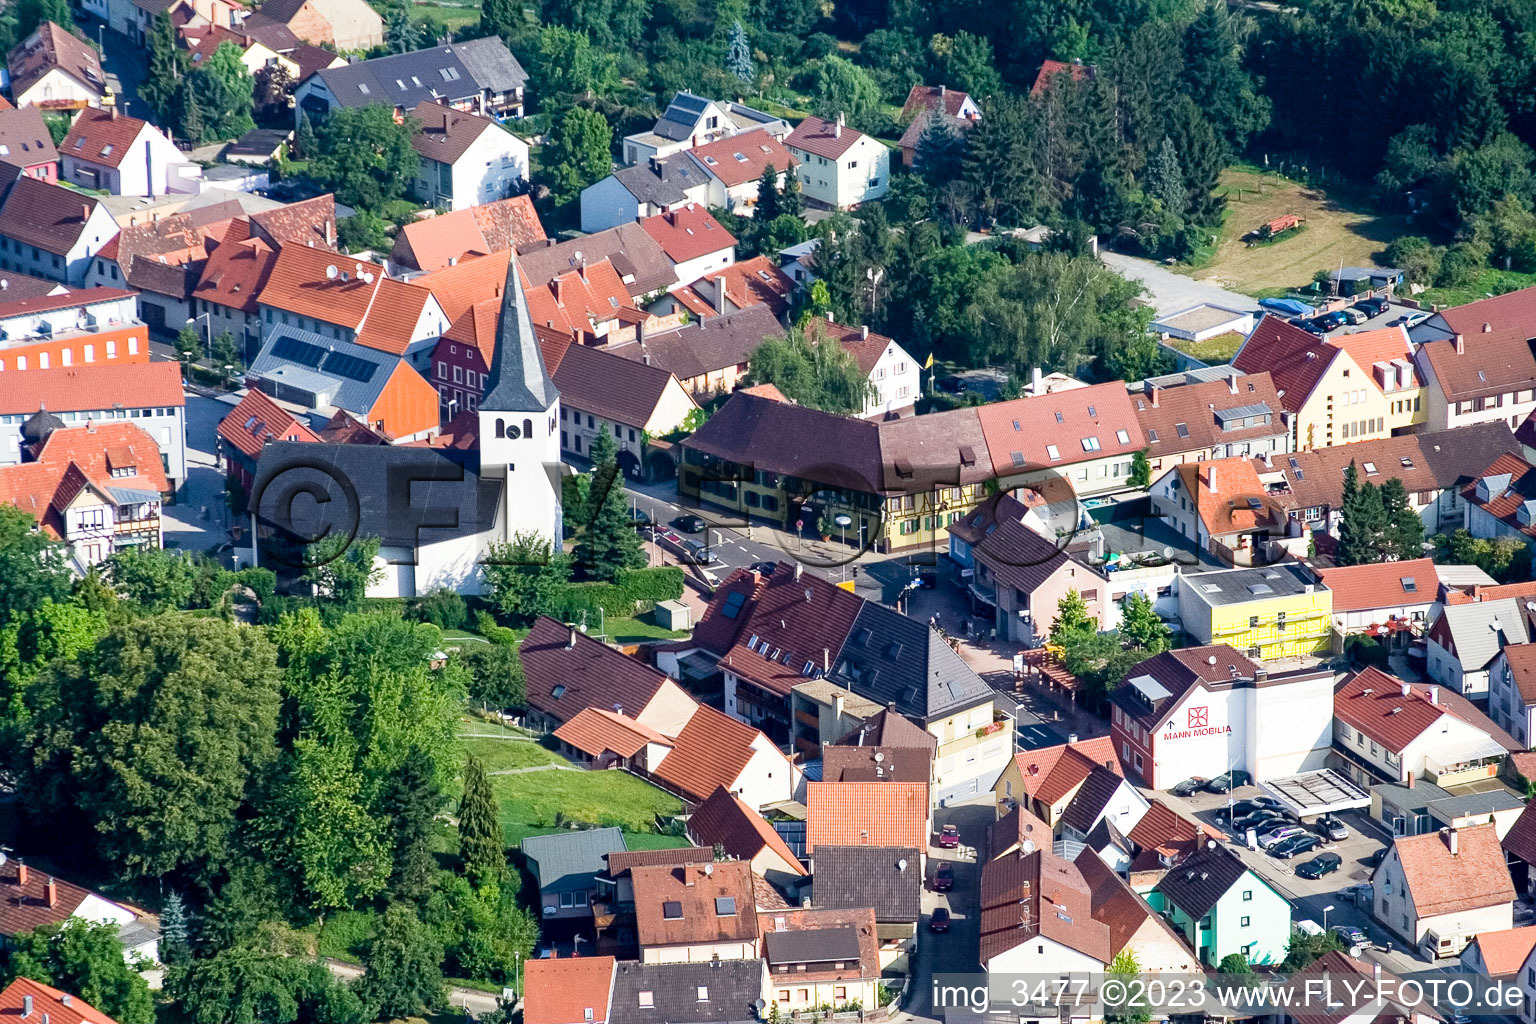 Aerial view of Martin's Church in the district Berghausen in Pfinztal in the state Baden-Wuerttemberg, Germany